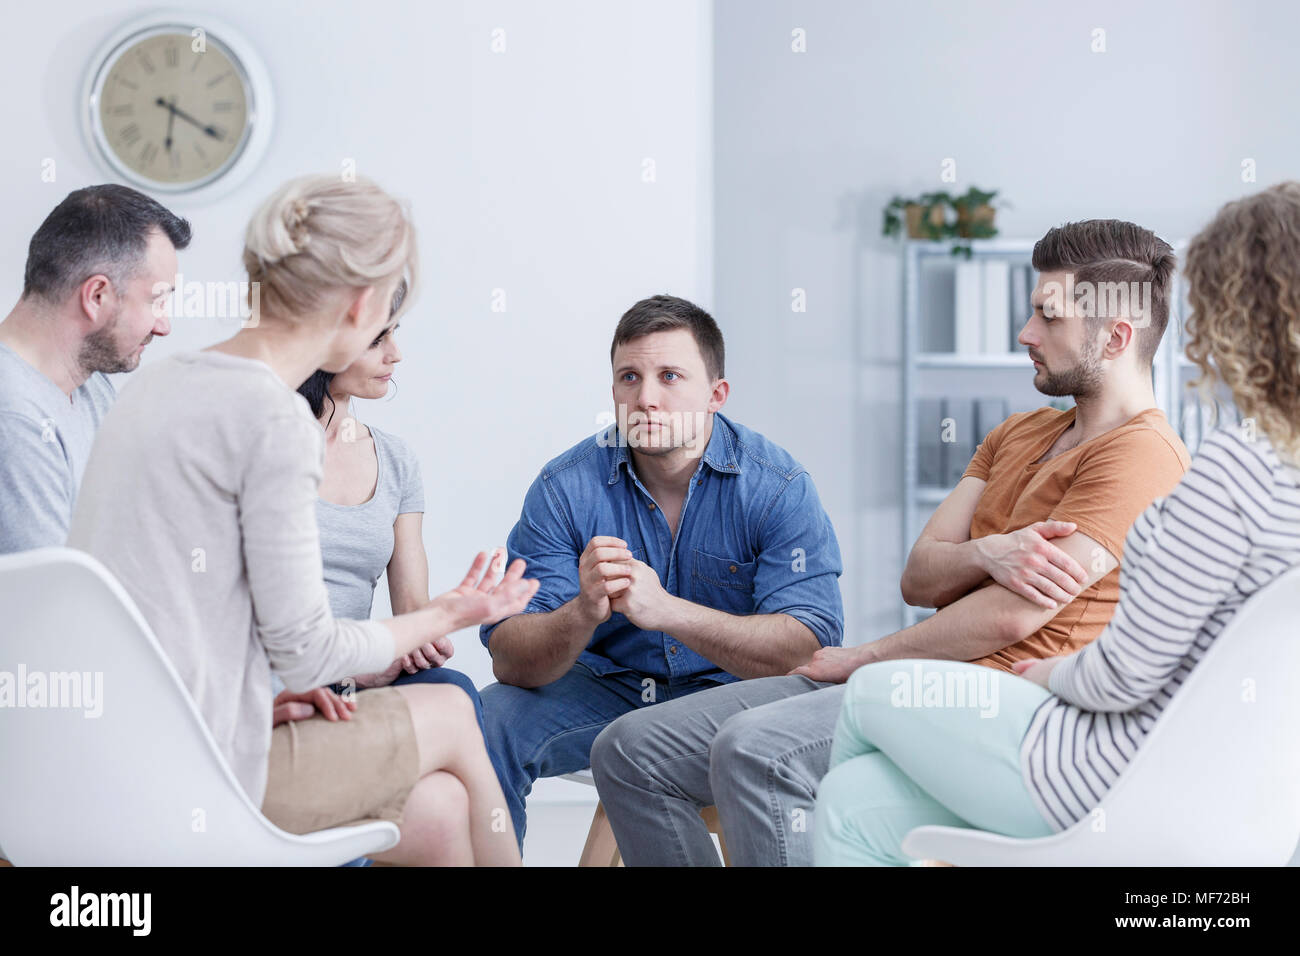 Sad, young man sitting in a bright office during a group meeting for gambling addicts Stock Photo